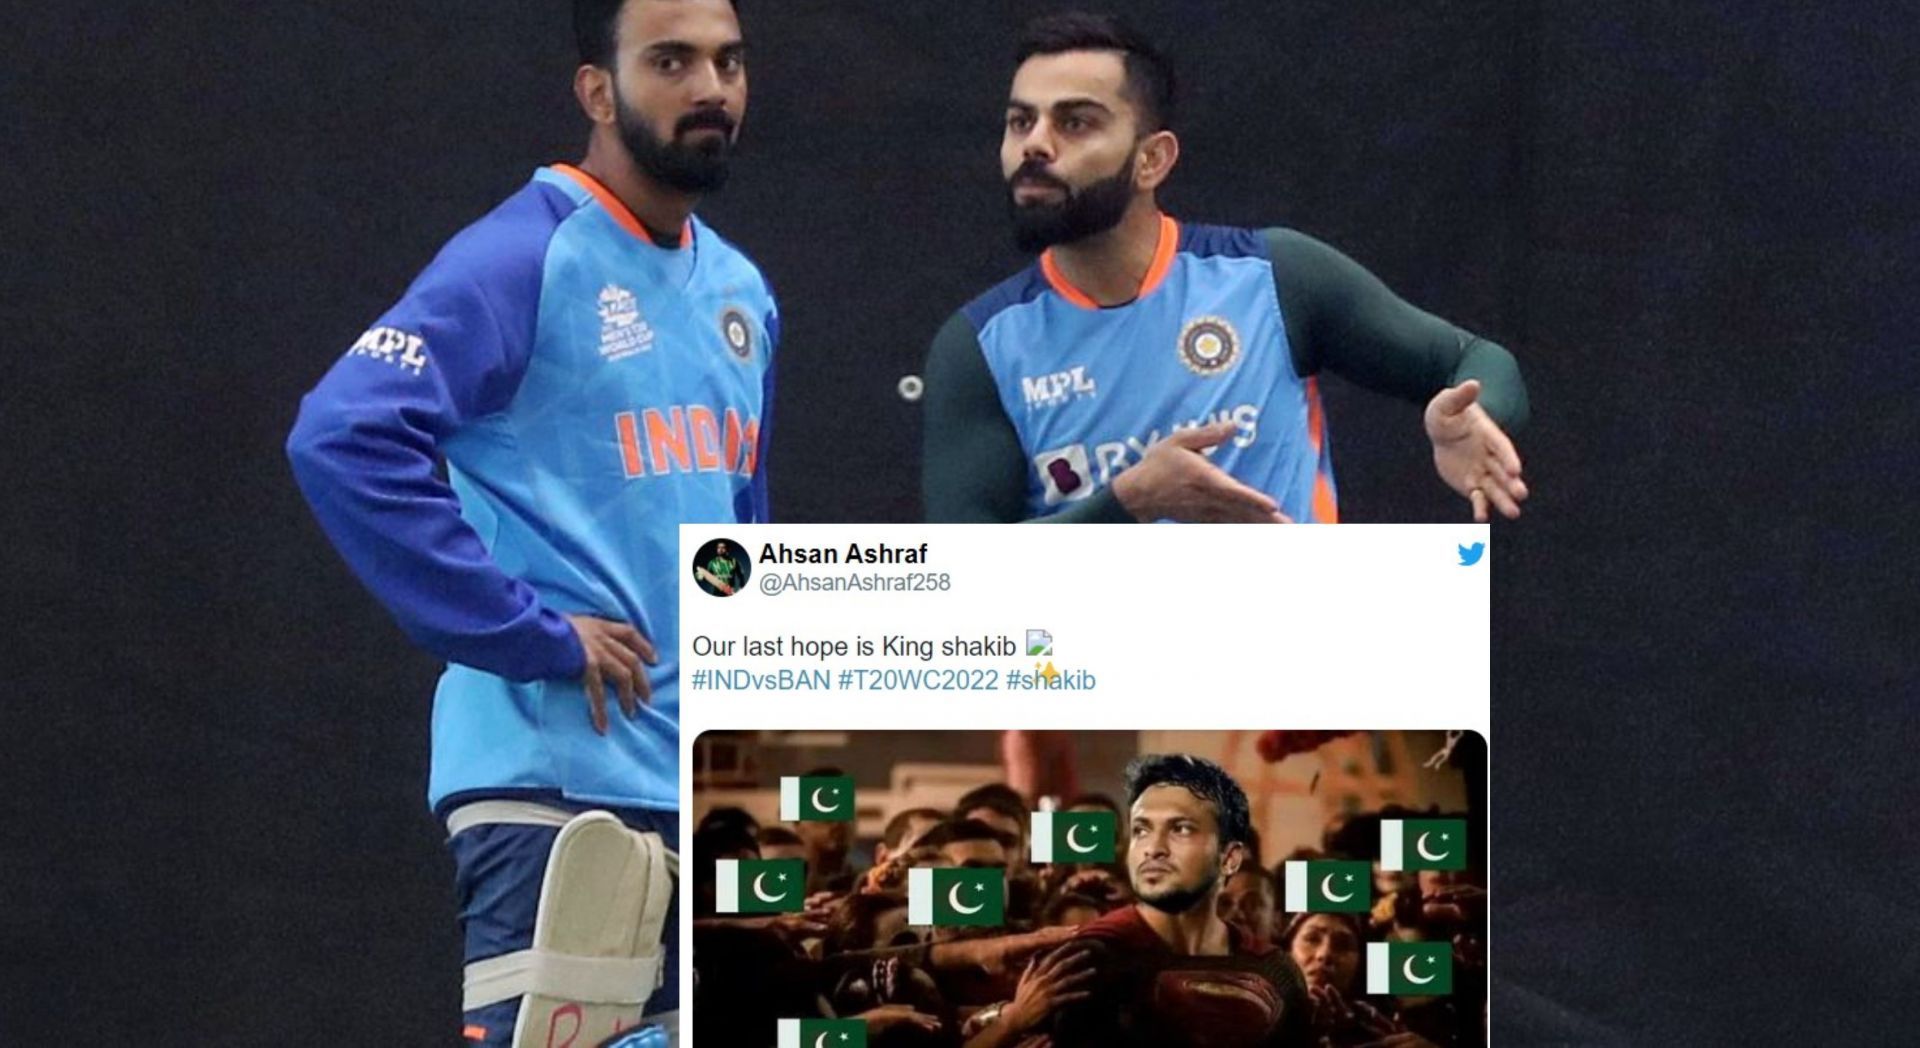 Fans react ahead of IND vs BAN contest on Wednesday